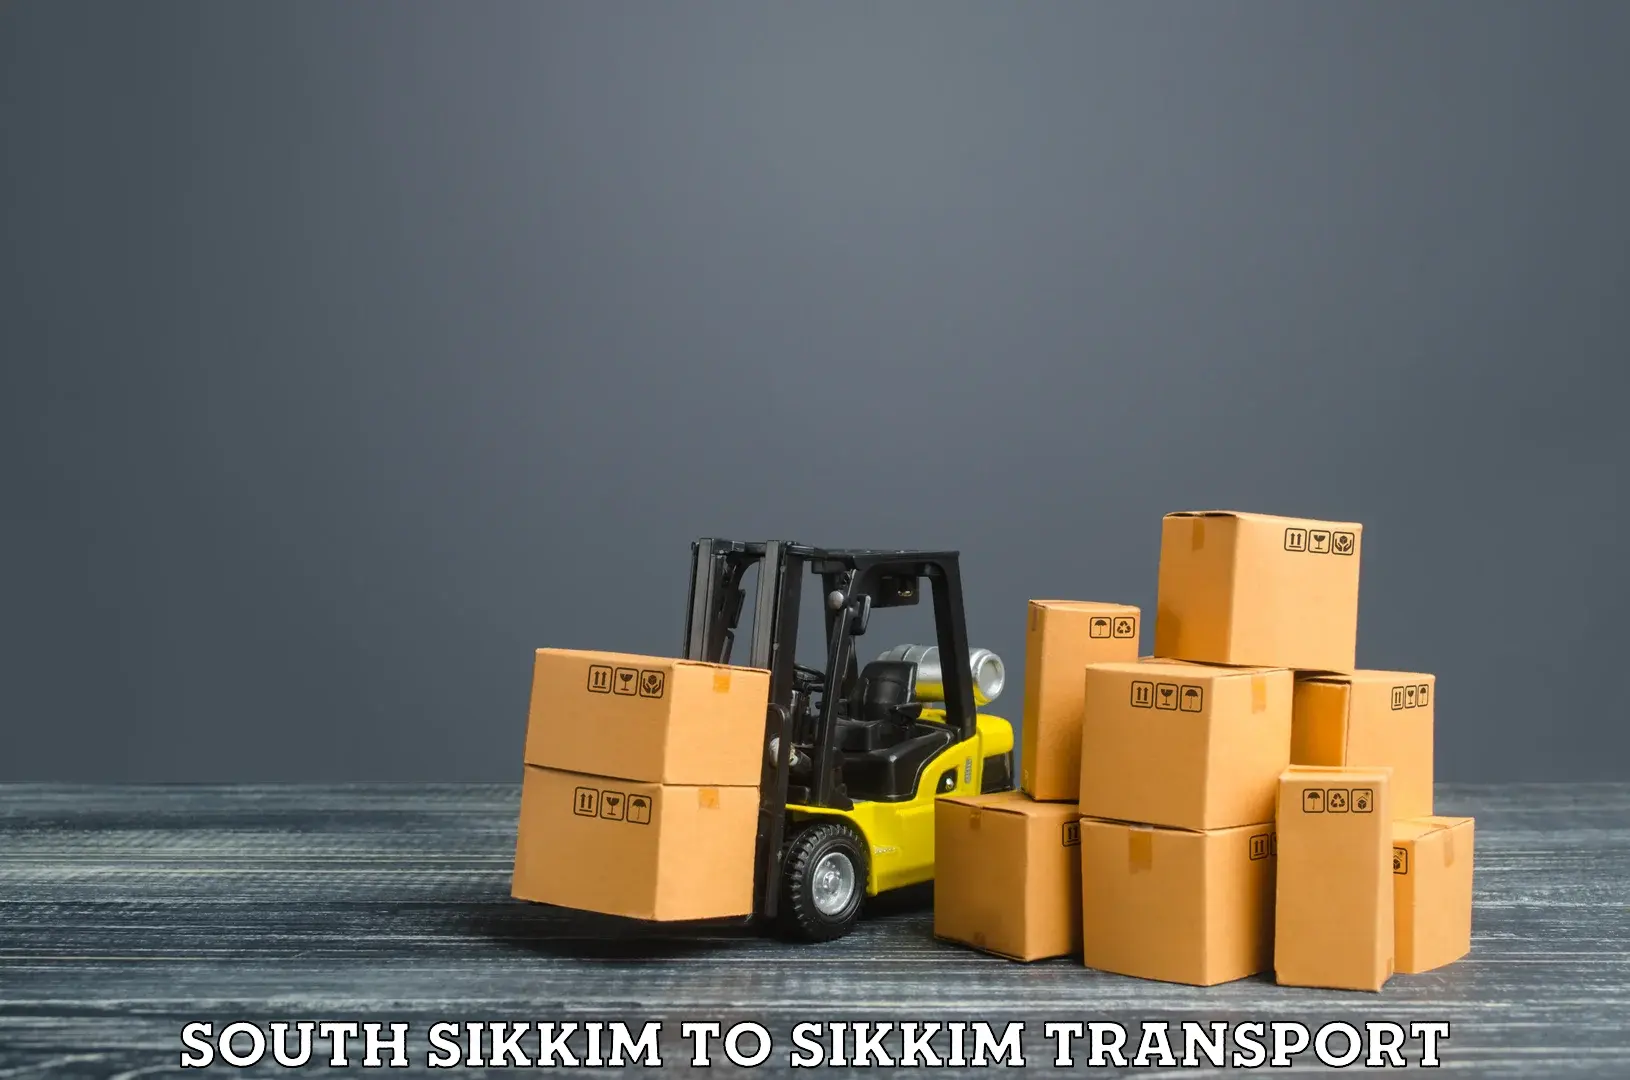 Two wheeler parcel service South Sikkim to Sikkim